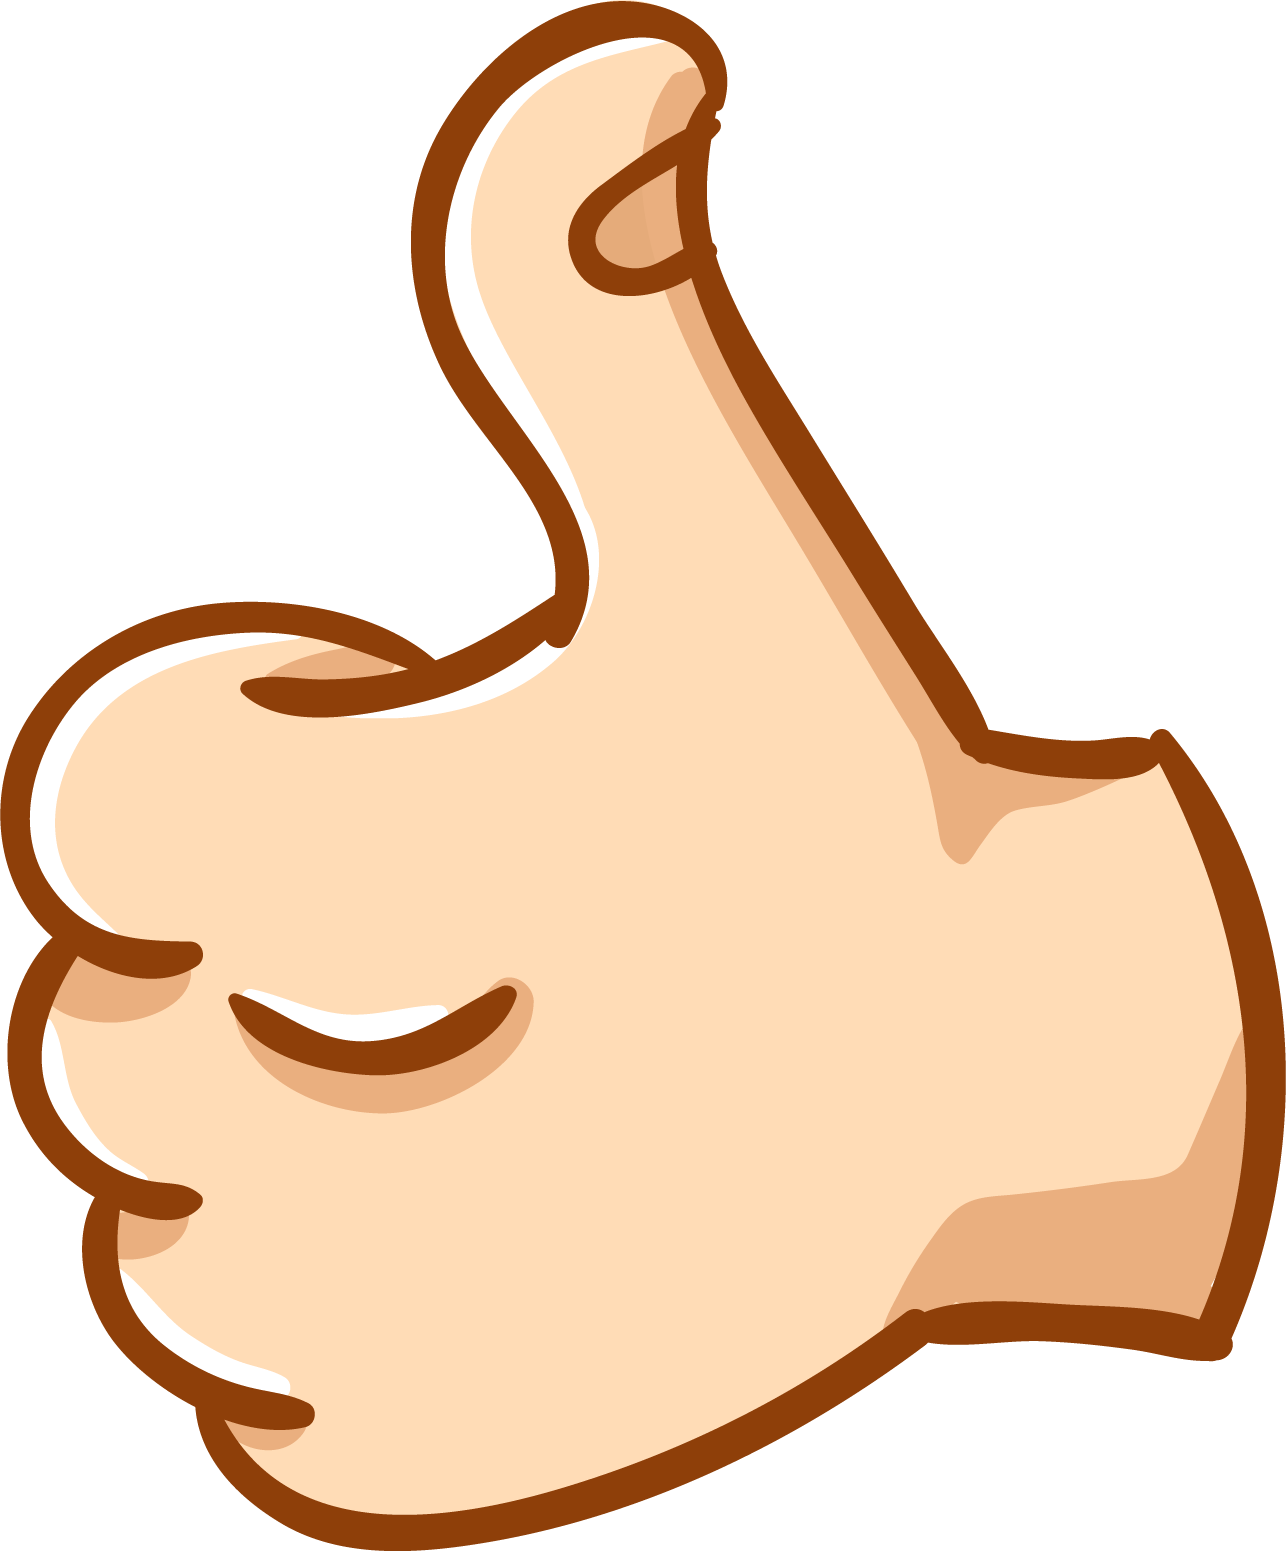 Thumbs Up Gesture Graphic PNG